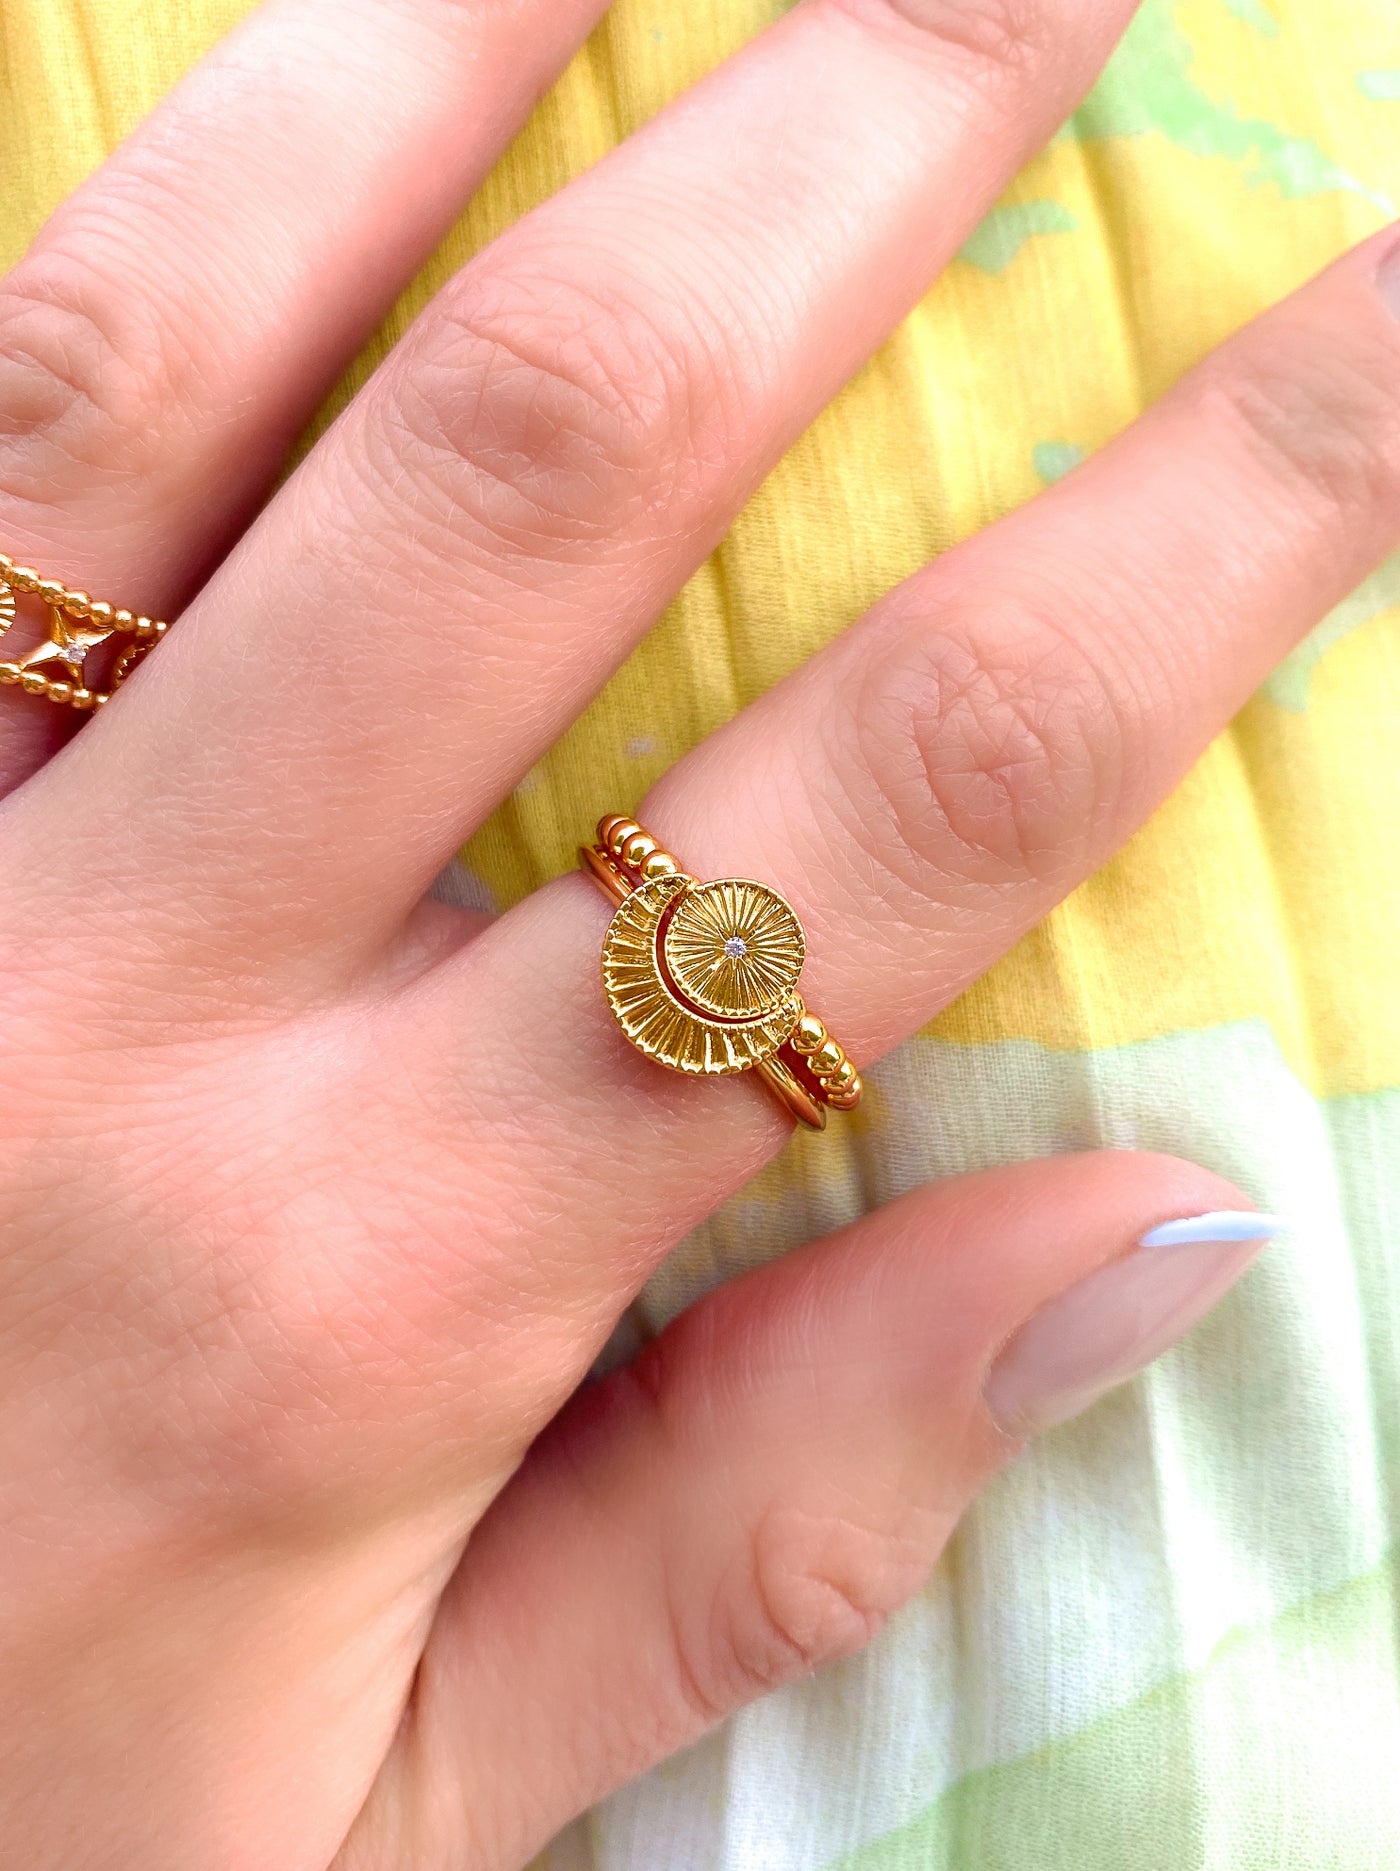 Gold engraved set of 2 sun and moon rings with CZ crystal